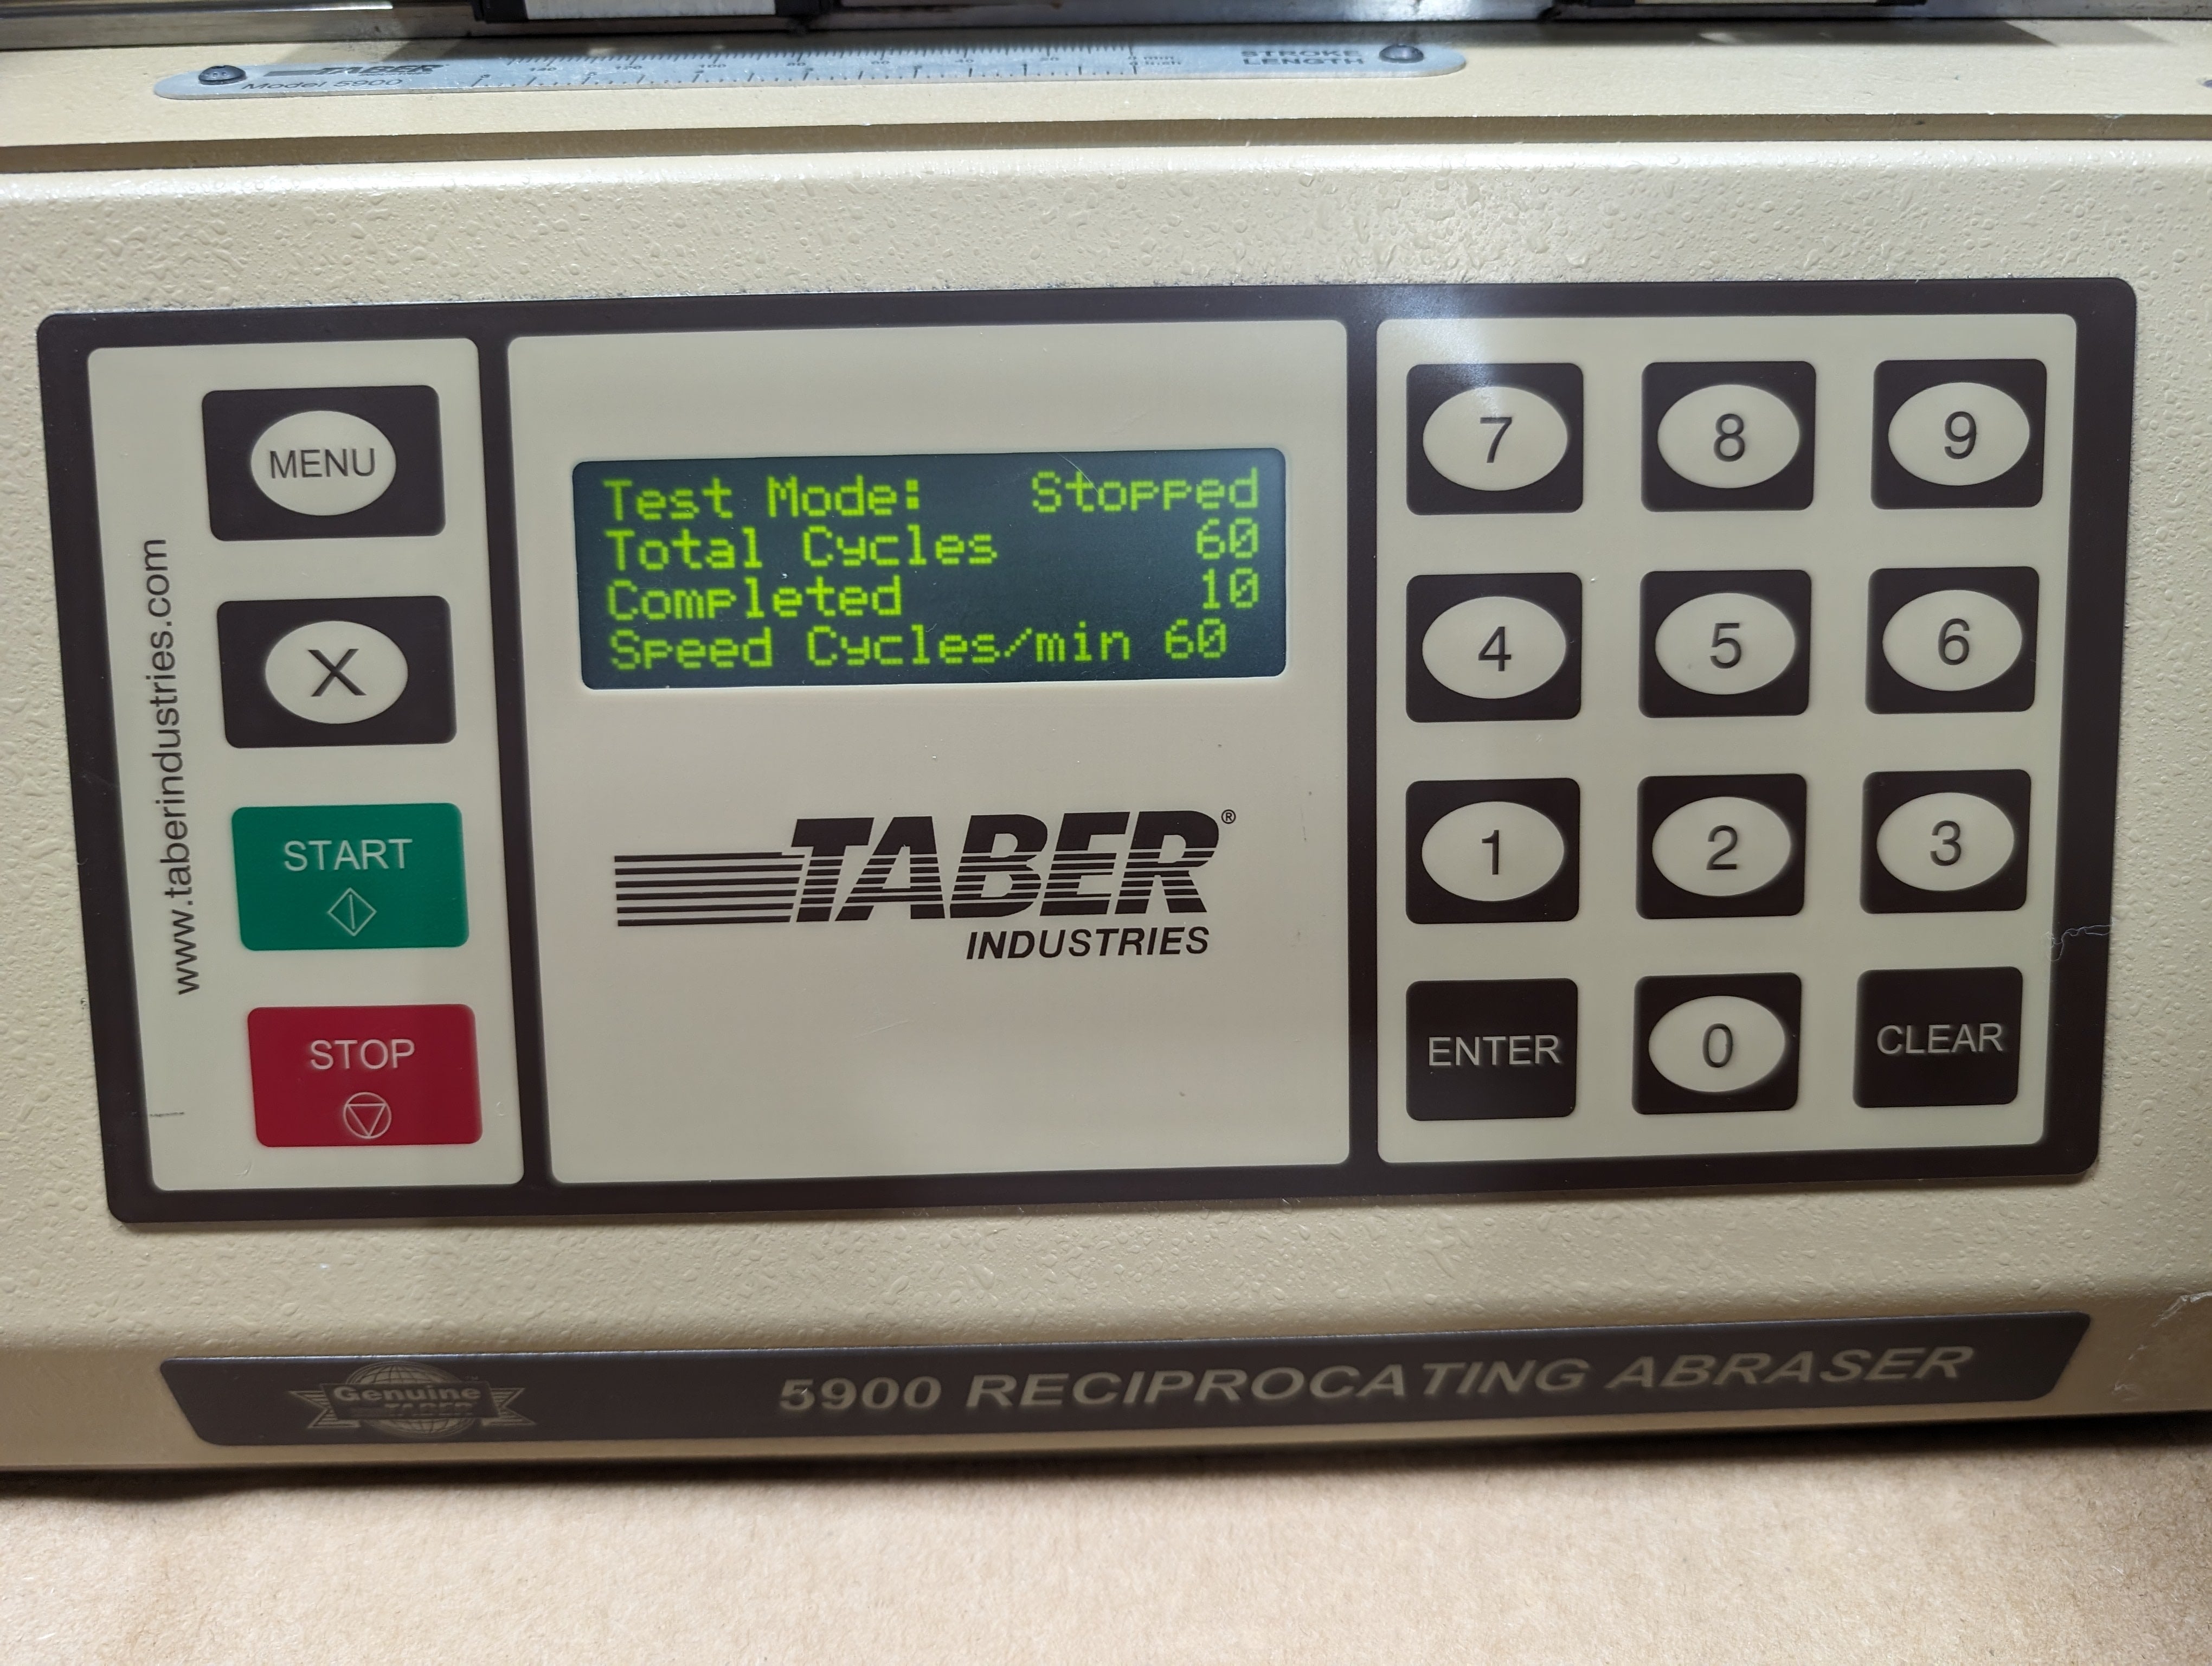 2011 Taber Industries 5900 Reciprocating Abraser Abrasion Tester Super Clean Used